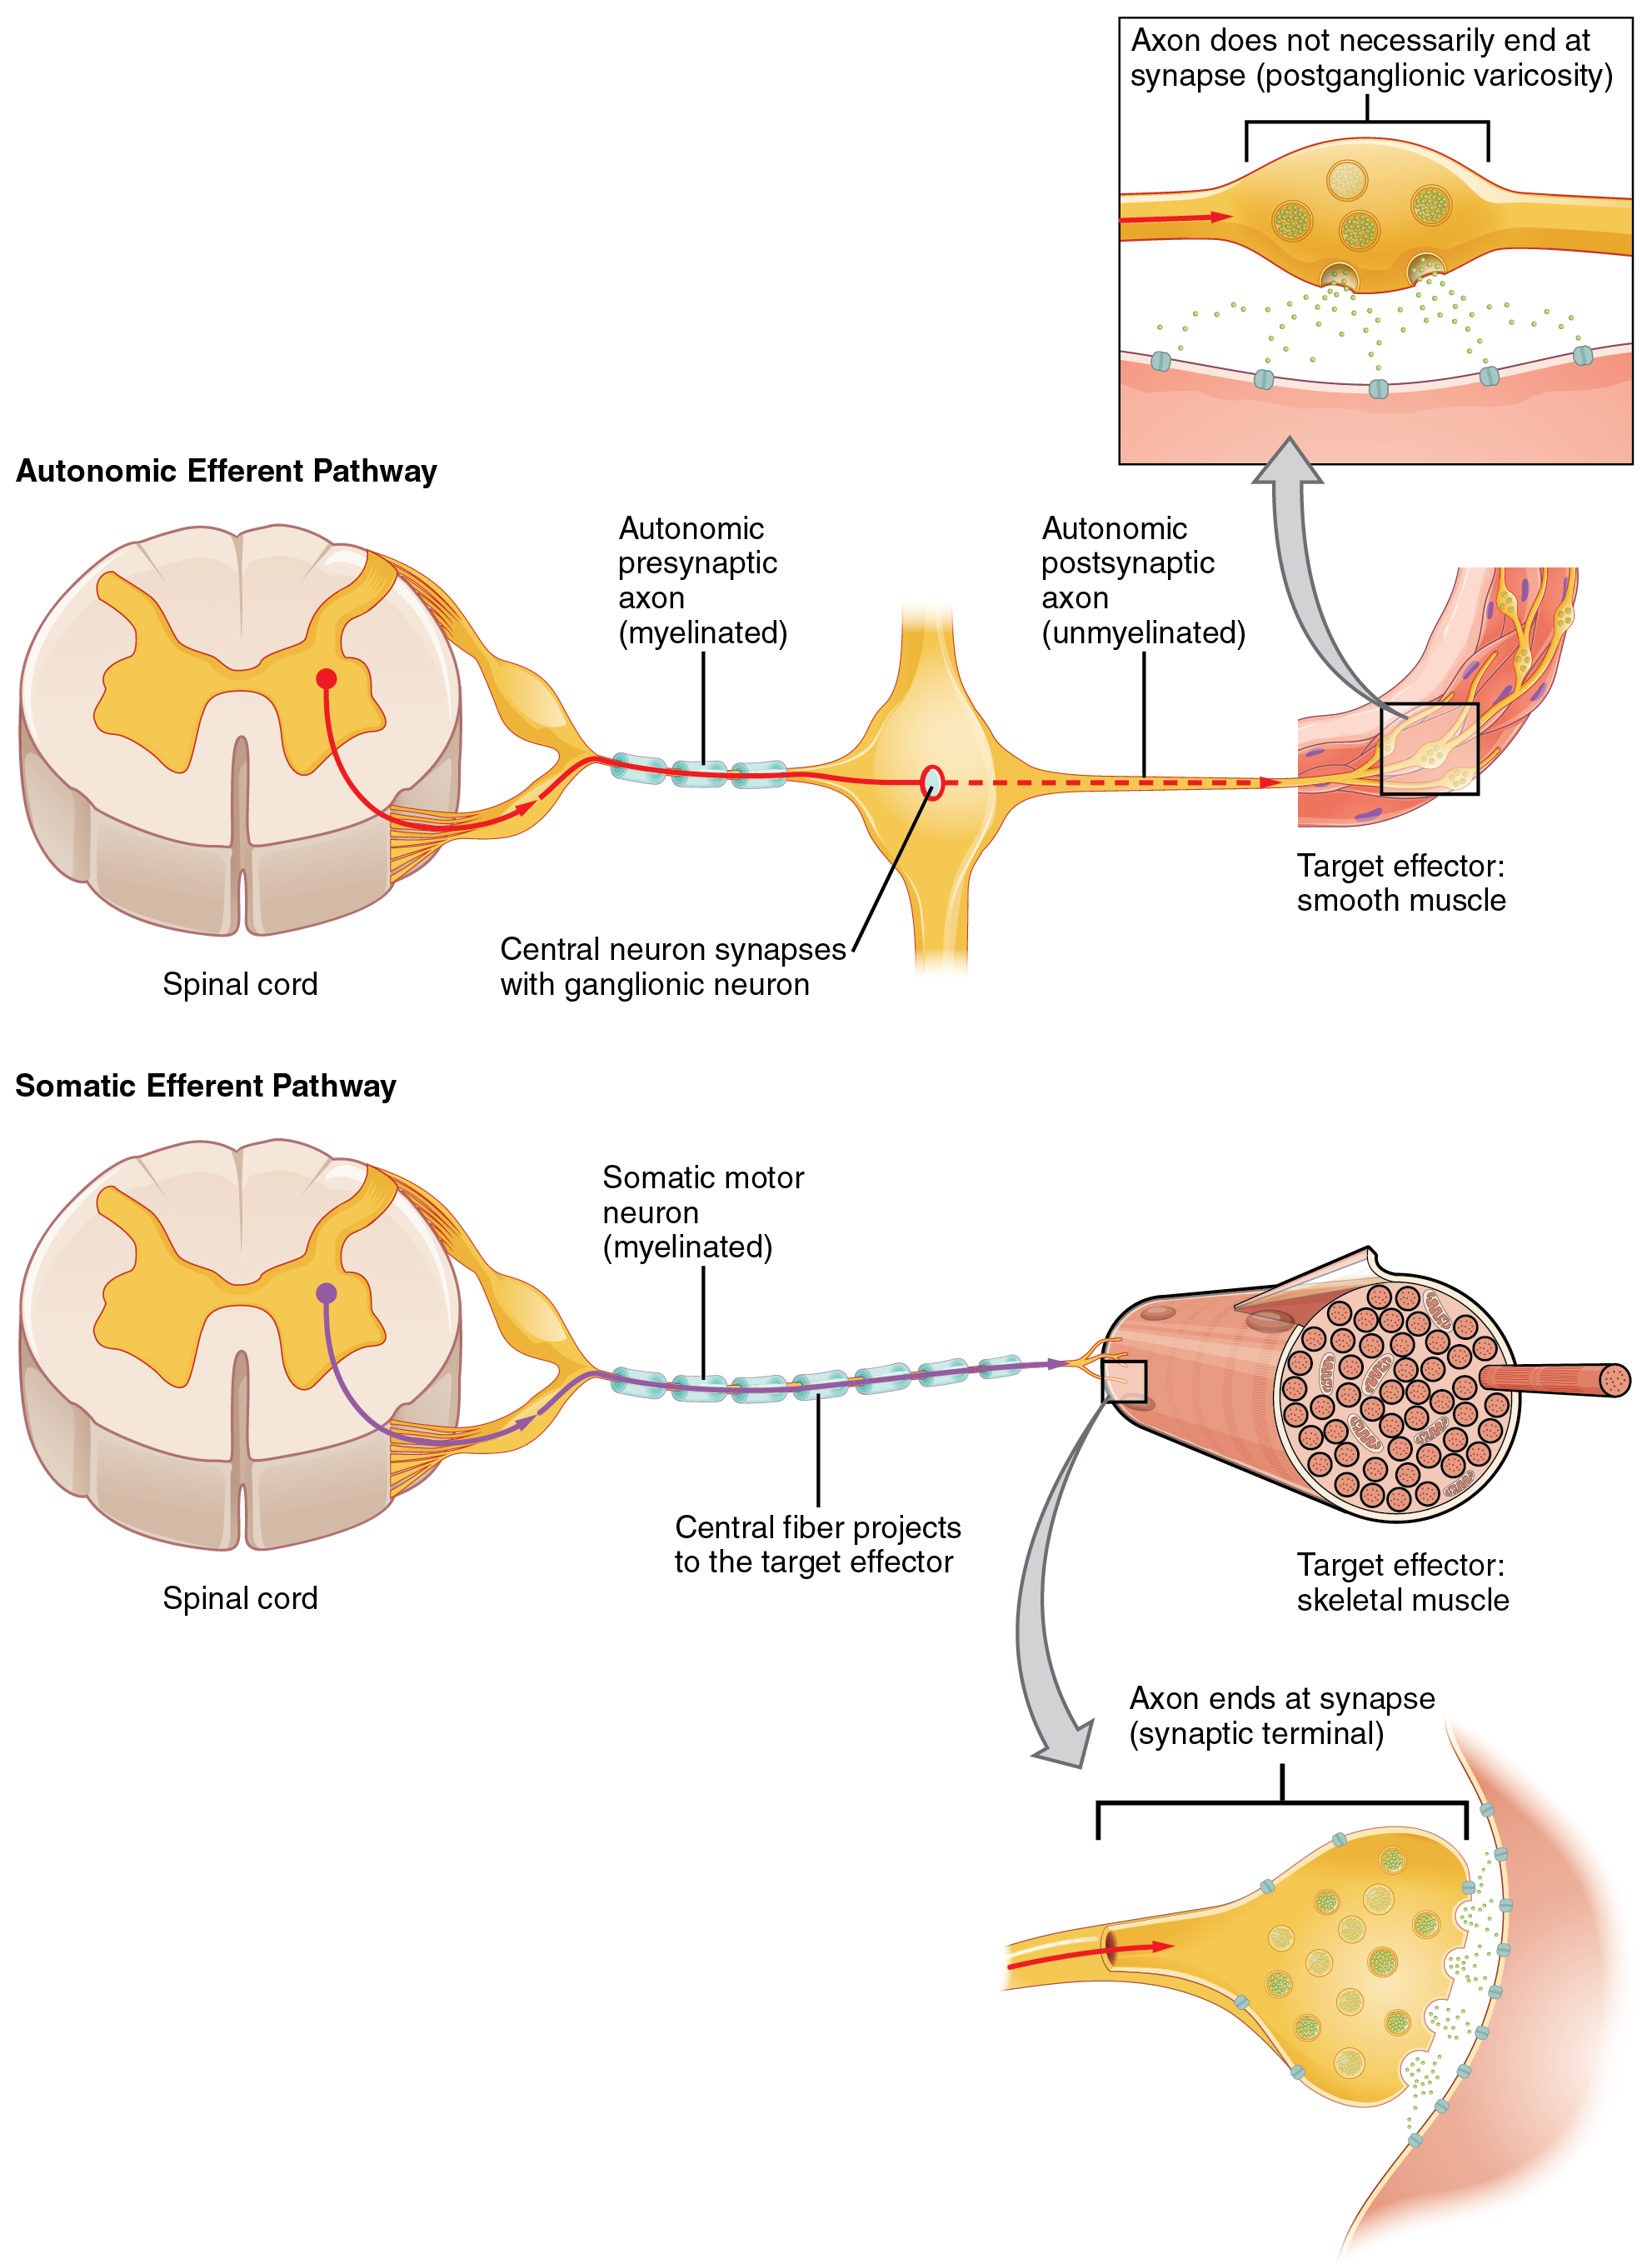 effectors of the somatic nervous system have